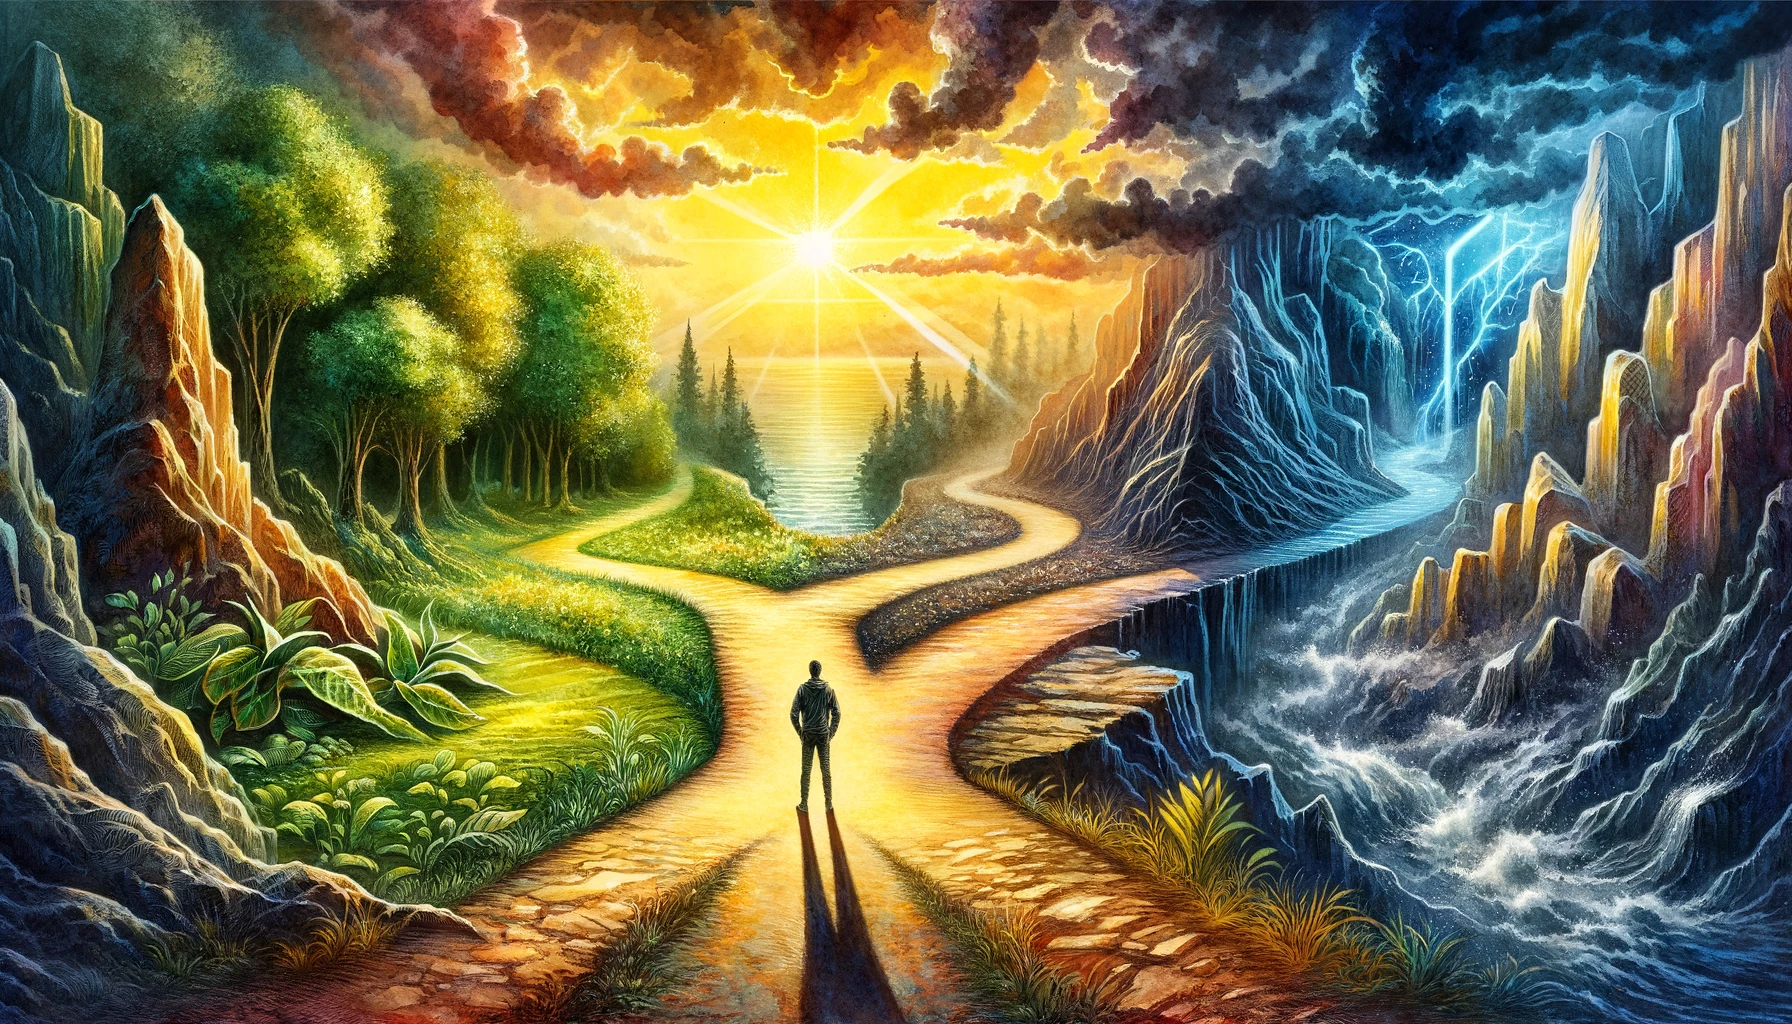 Crossroads in a dreamlike landscape, showcasing a decision point between a bright, forested path and a gloomy, rocky trail.